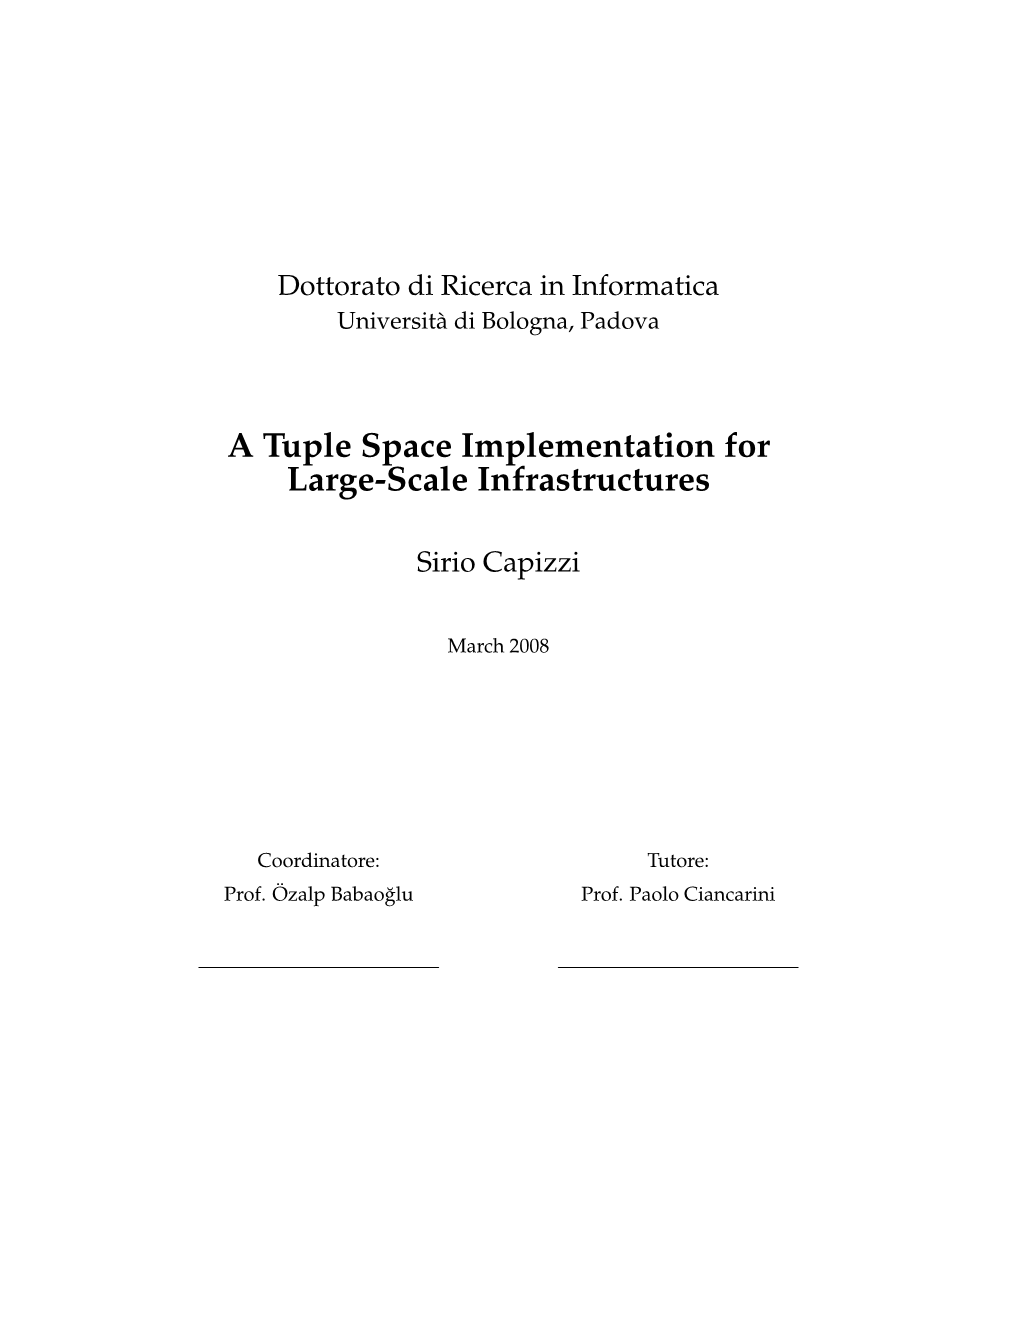 A Tuple Space Implementation for Large-Scale Infrastructures